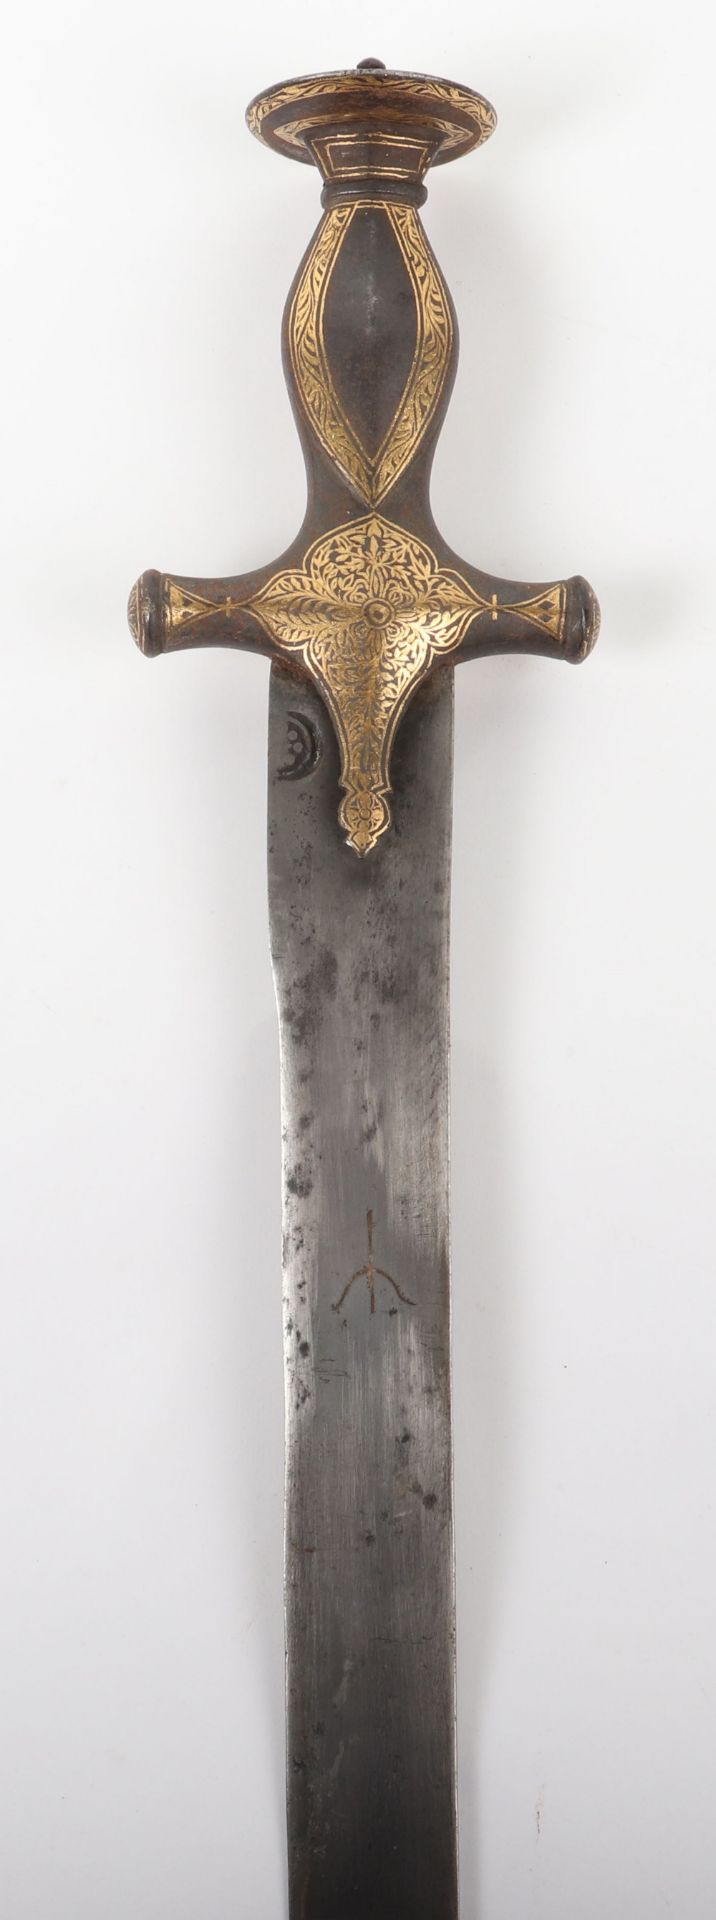 Decorative Indian Sword Tulwar Perhaps for a Youth - Image 2 of 13